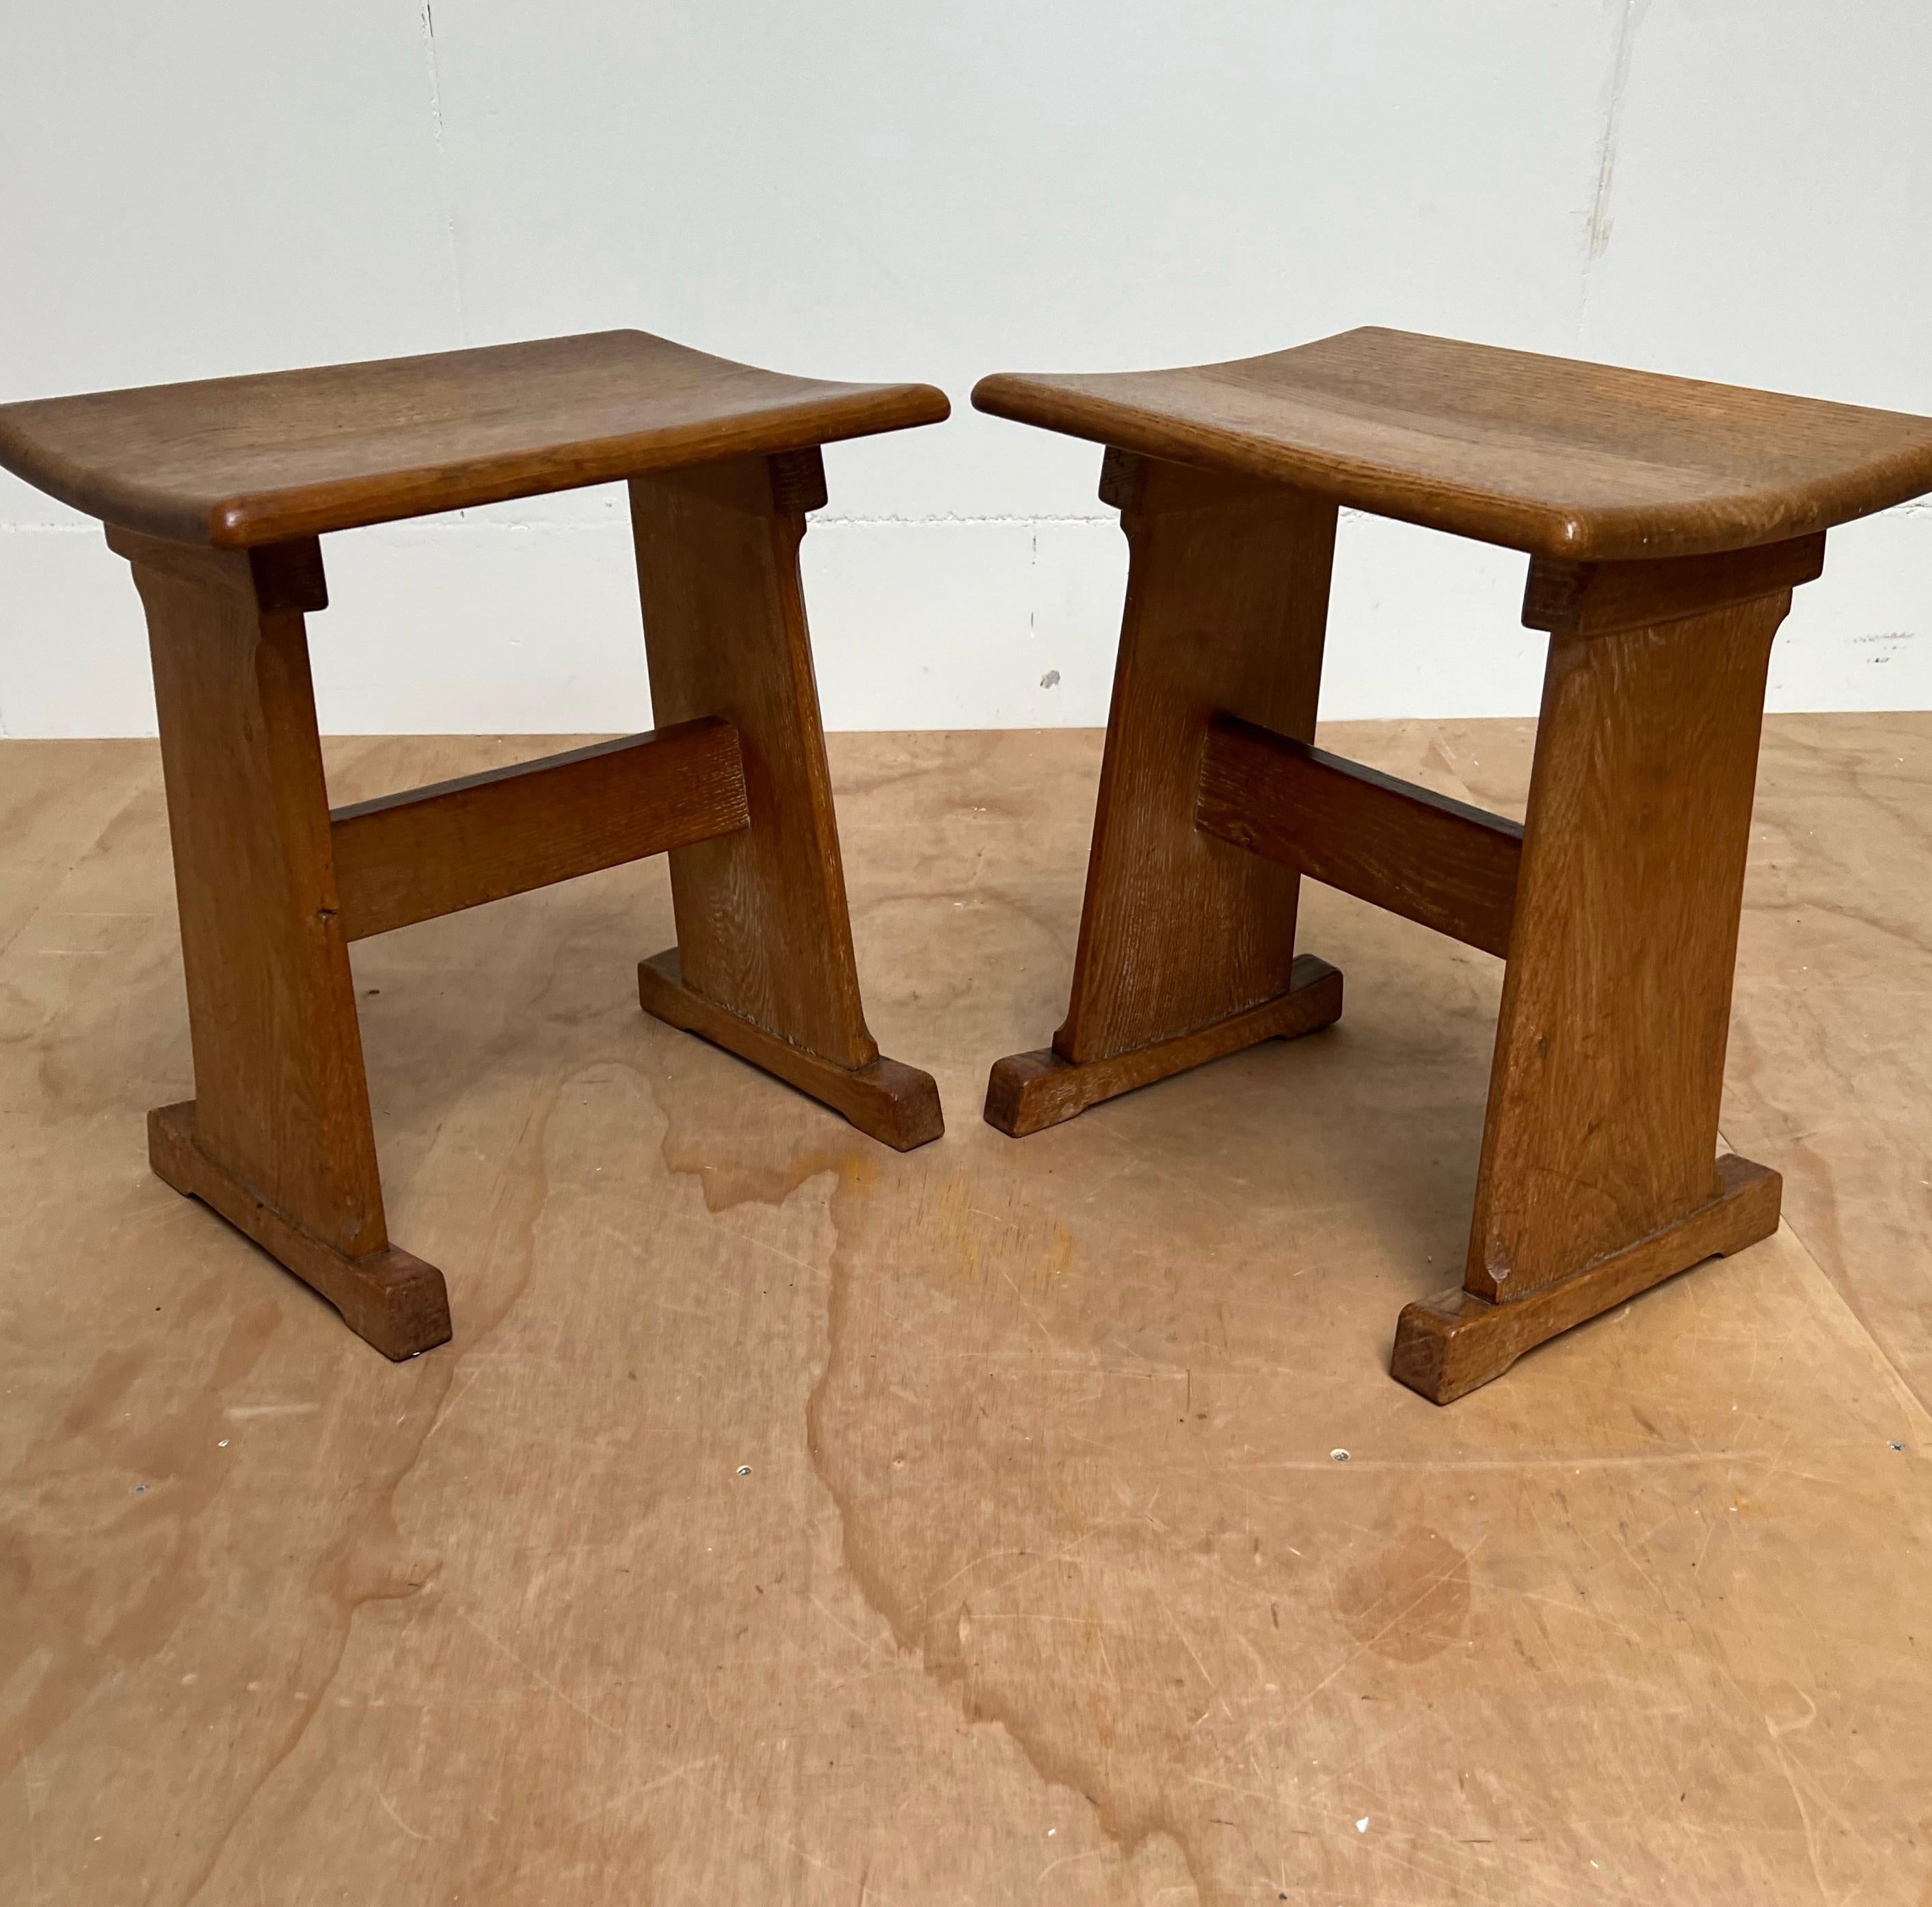 European Rare & Sturdy Vintage Pair of Handcrafted Oak Arts & Crafts Stools w Curved Seat For Sale